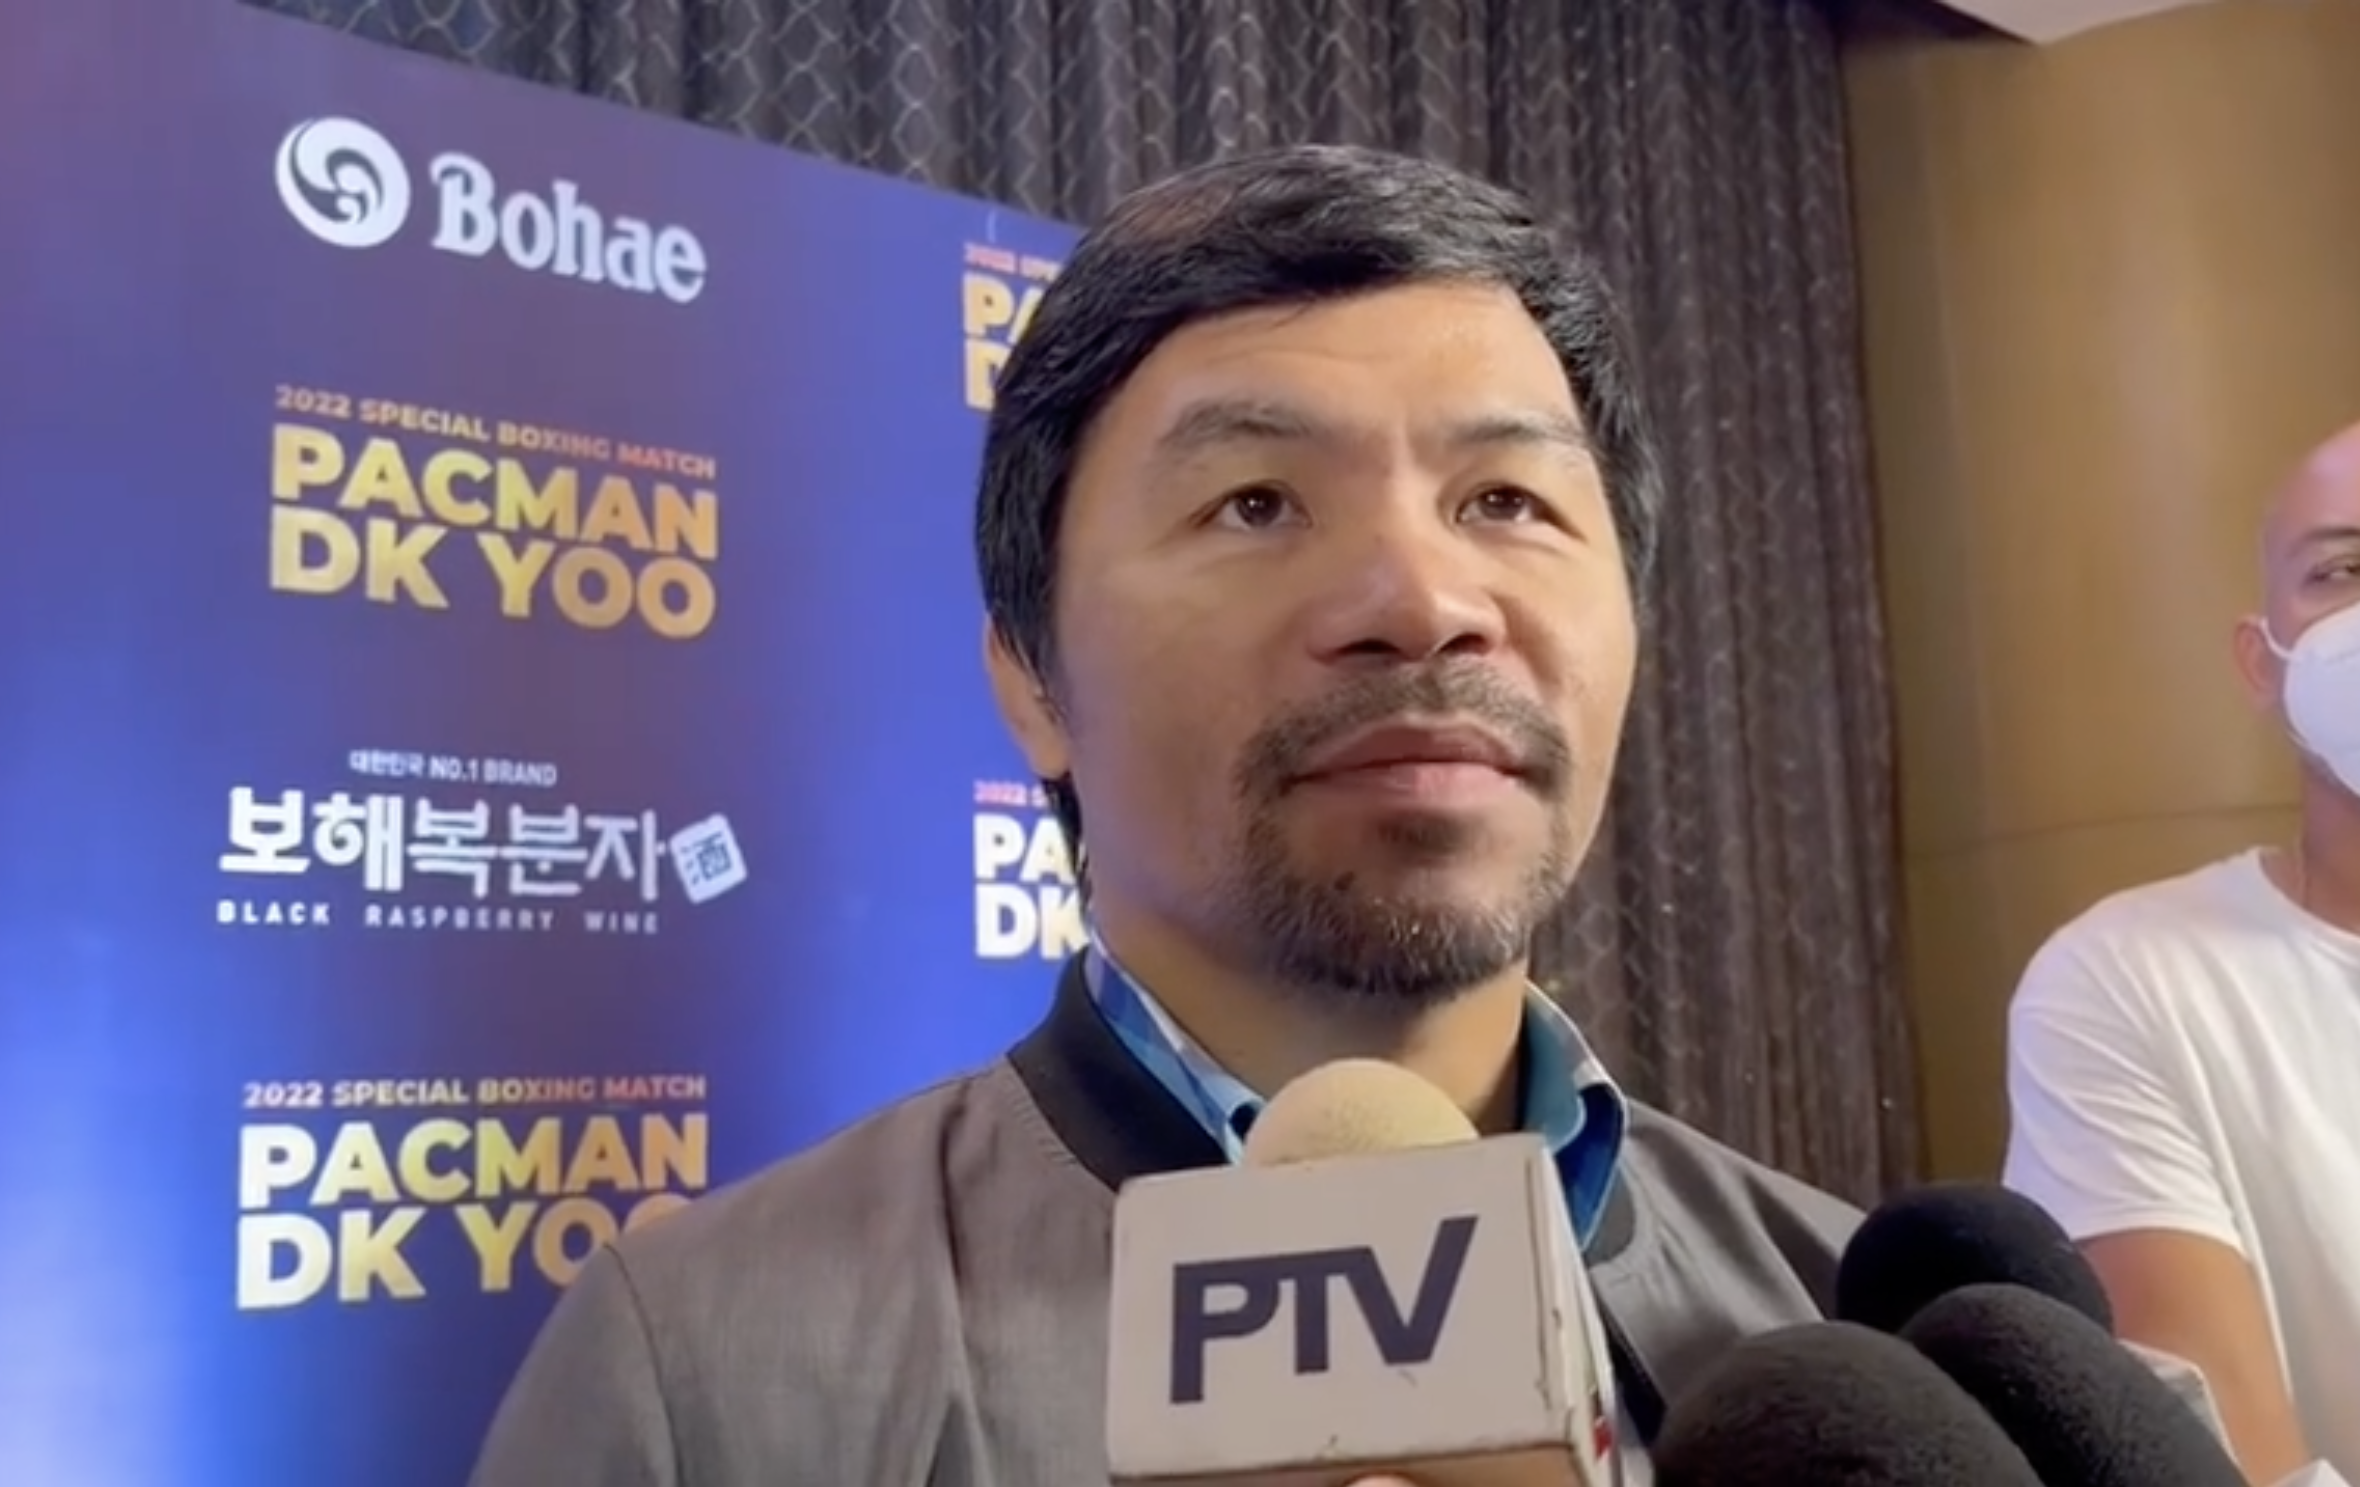 Manny Pacquiao ahead of the press conference for his exhibtion match against DK Yoo. 